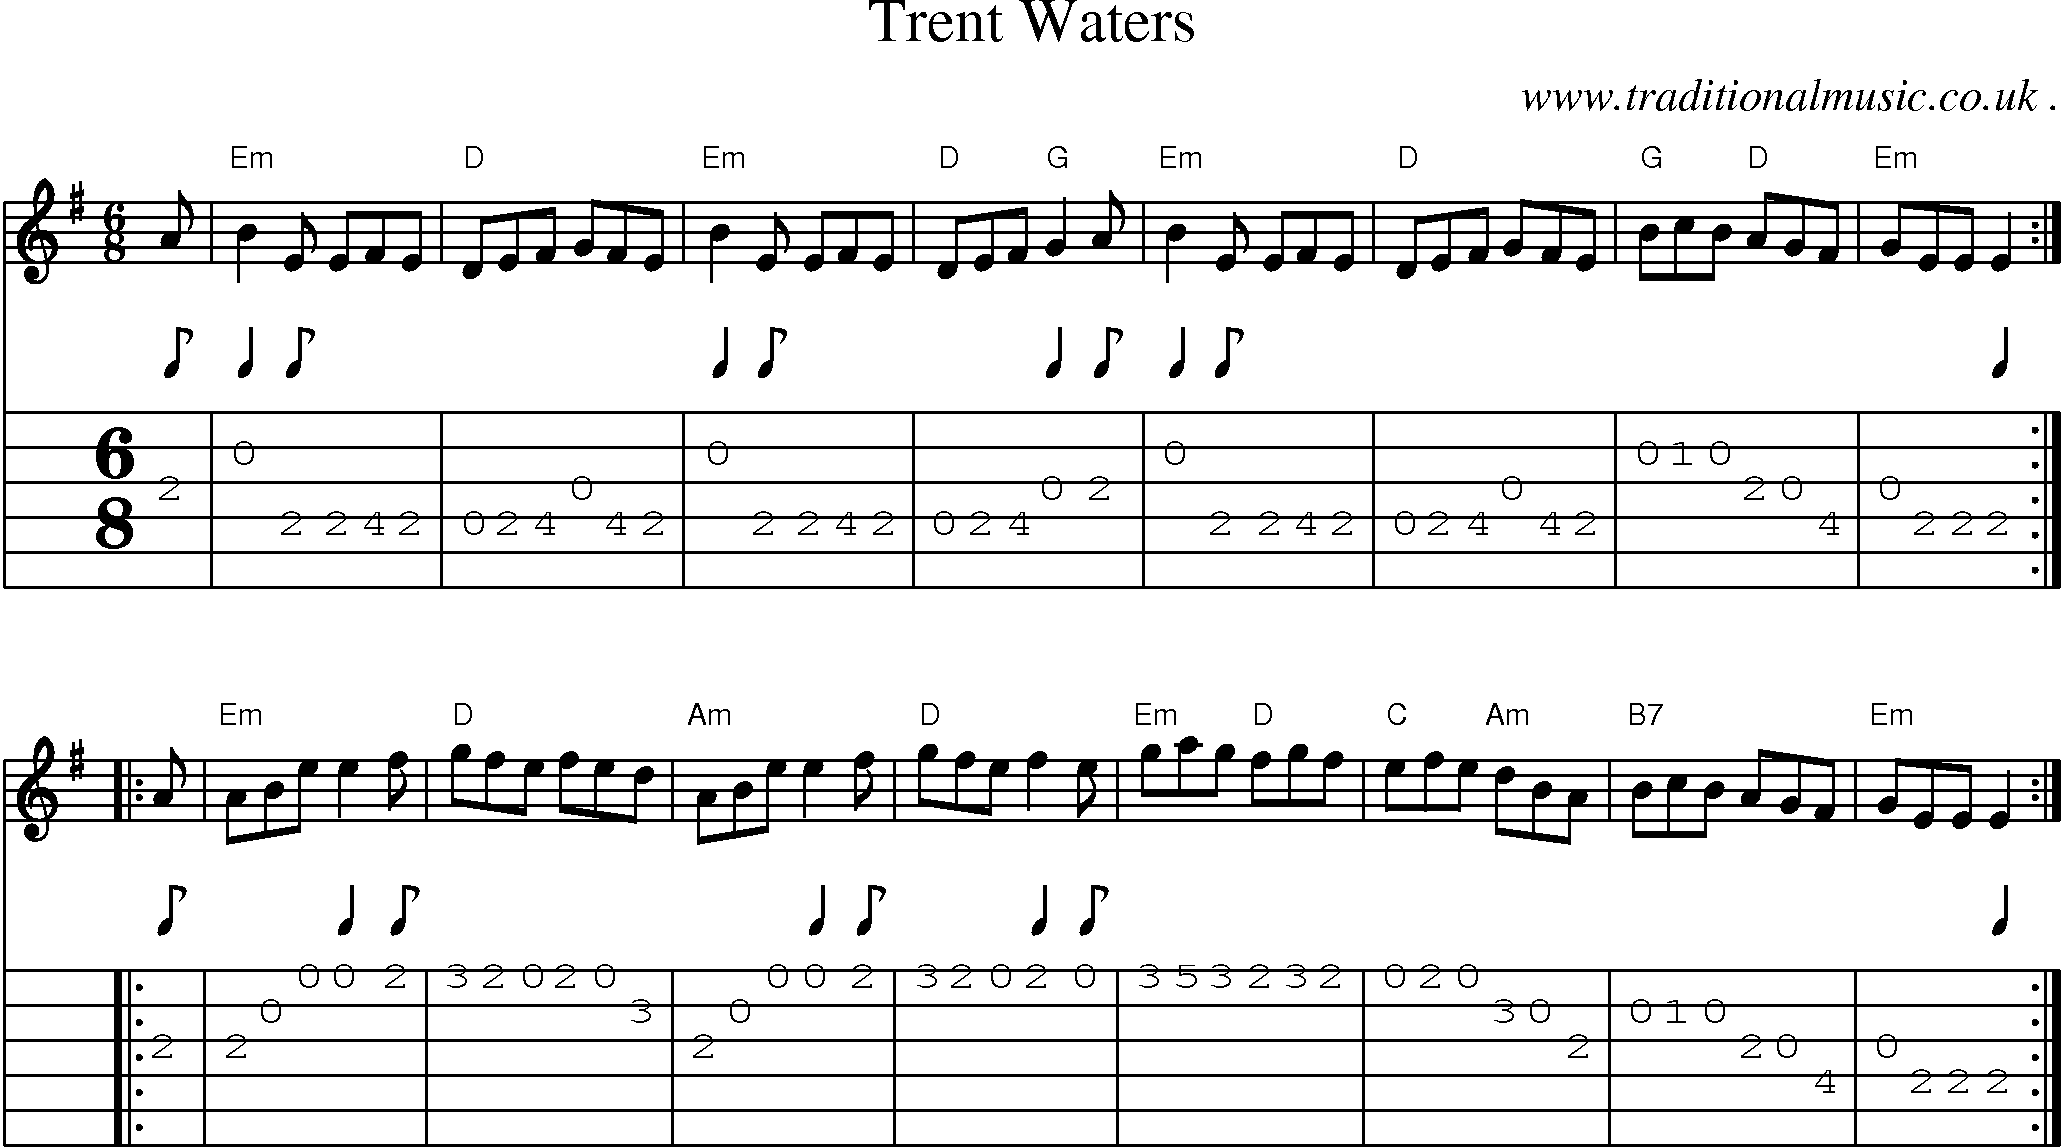 Sheet-music  score, Chords and Guitar Tabs for Trent Waters